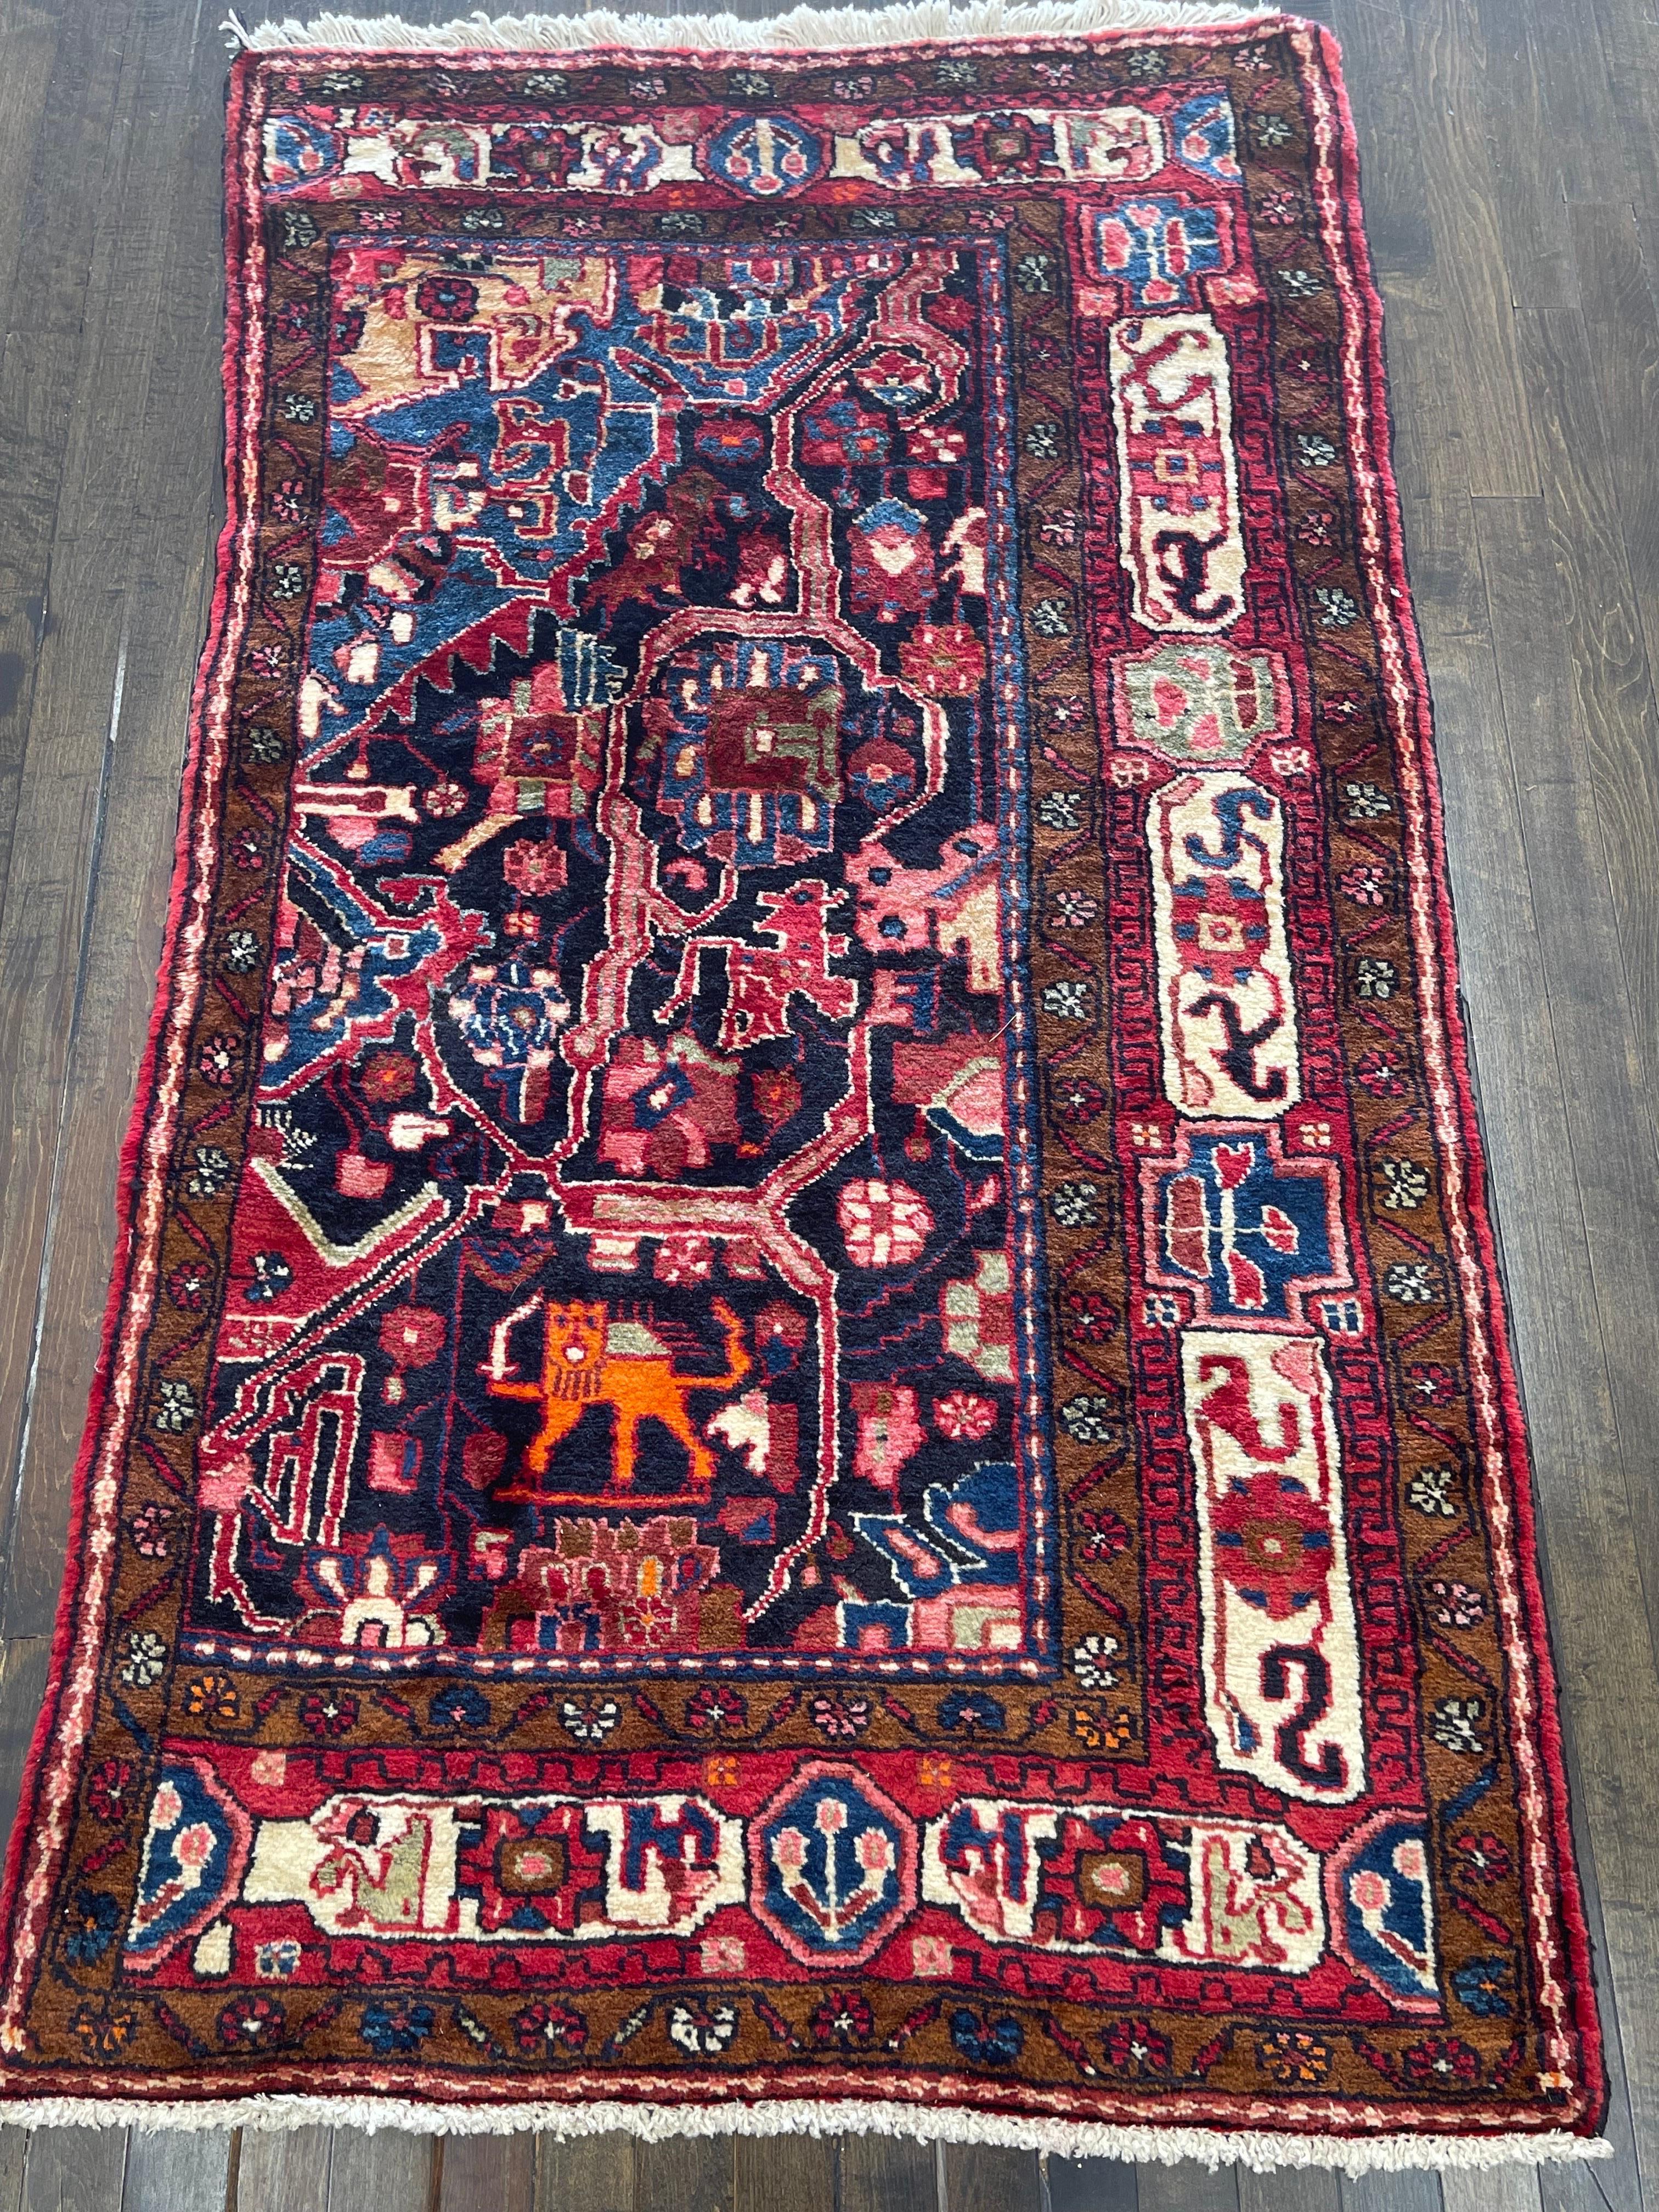 A cute sampler rug on a dark blue field and sky blue corner which was made to showcase how a larger rug might look like.

 Sampers like this provide a means by which designs may be passed from one weaver to another or from one generation to the